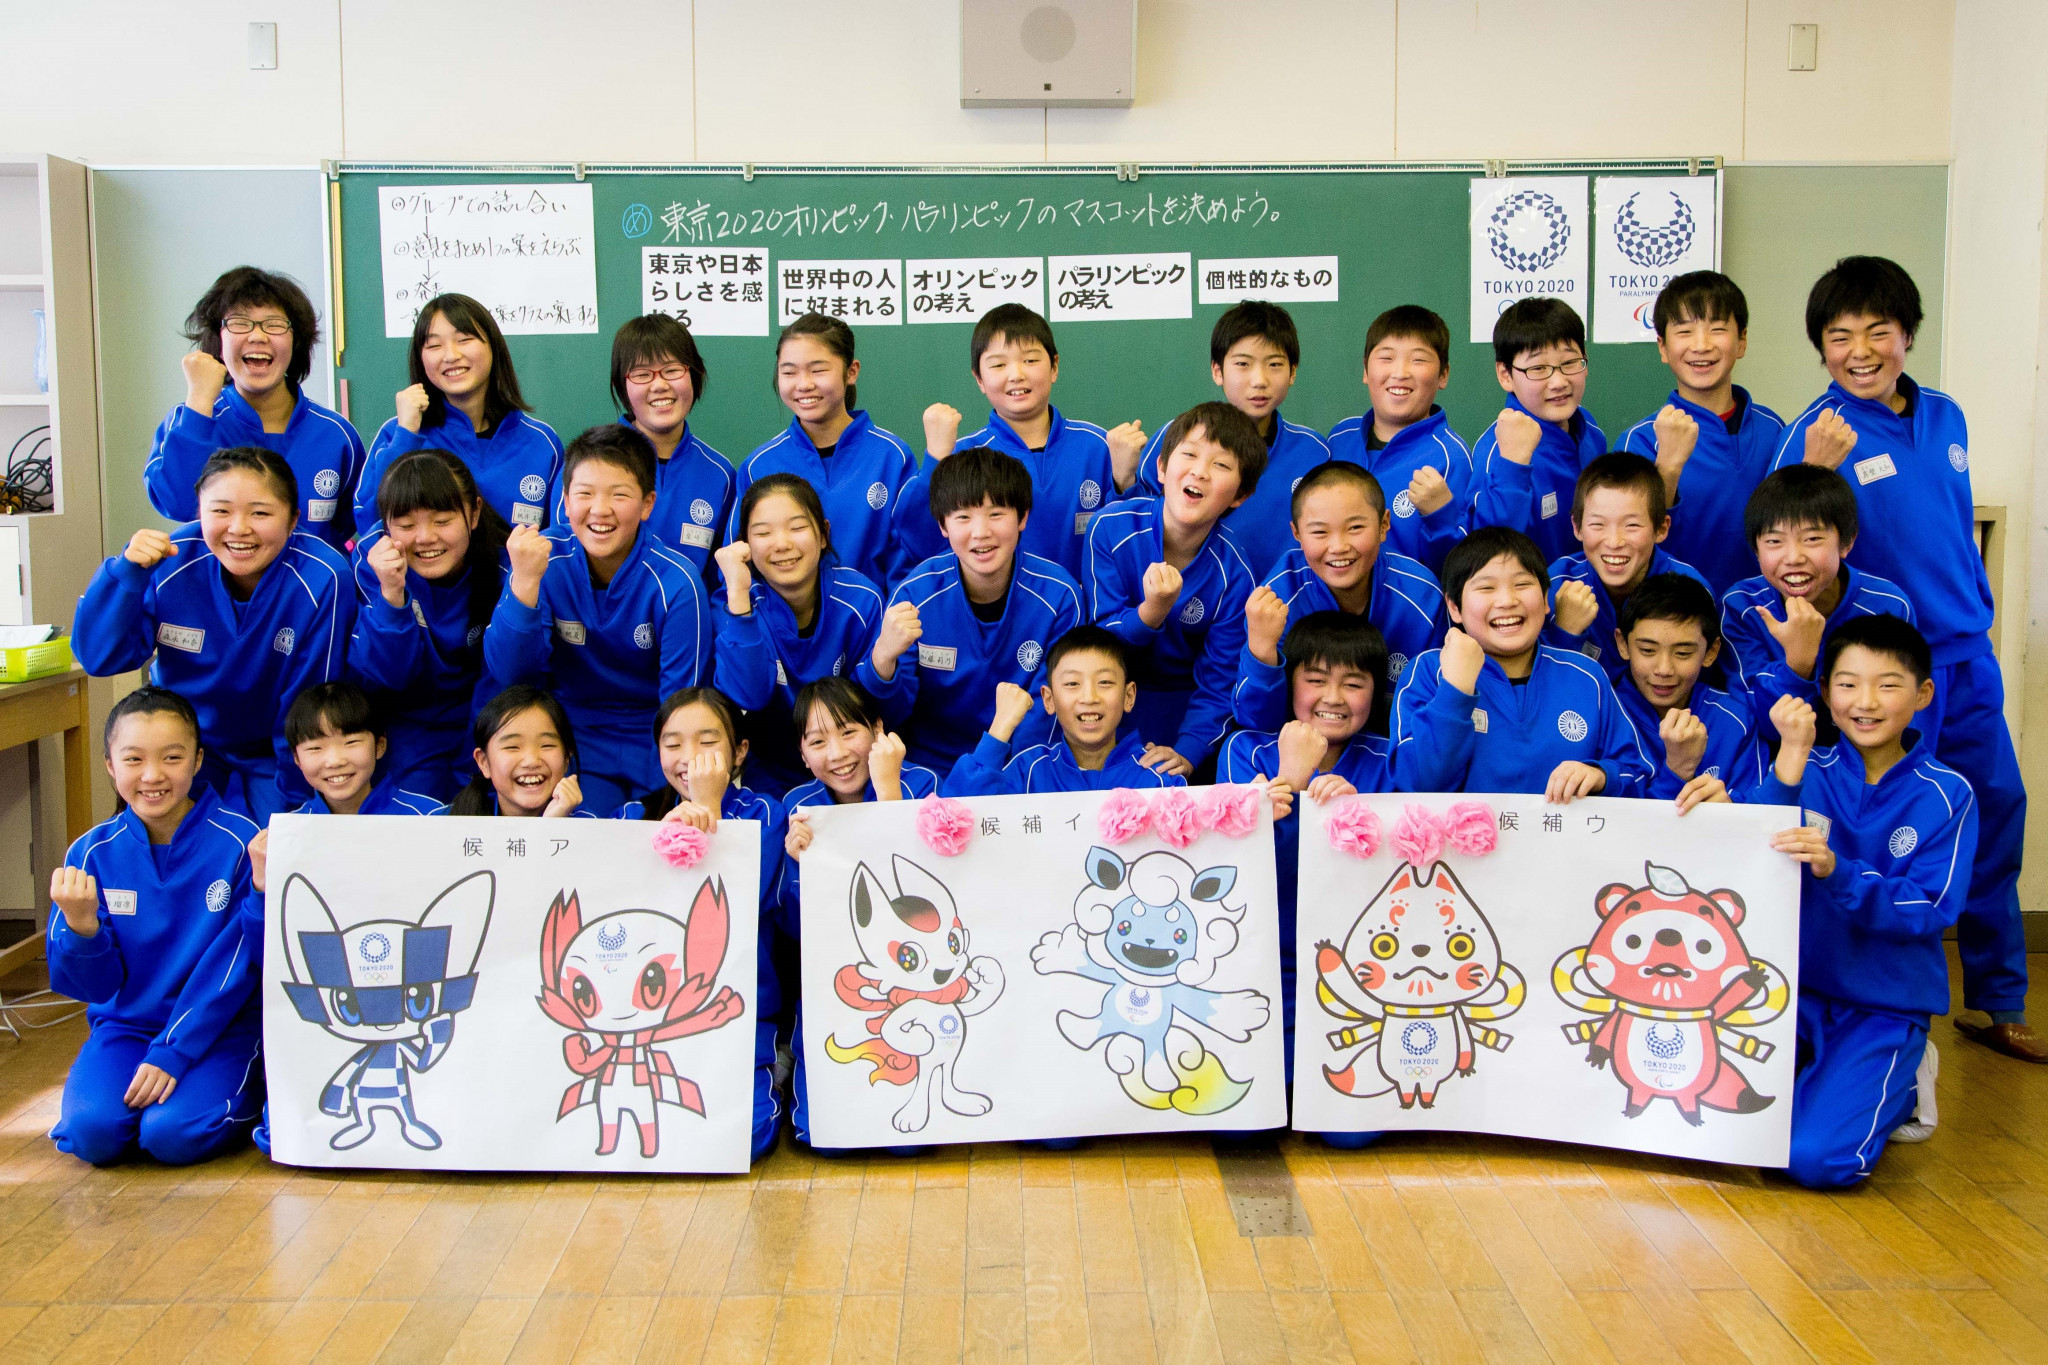 Voting for the Olympic and Paralympic mascots began in schools today, with three choices ©Tokyo 2020